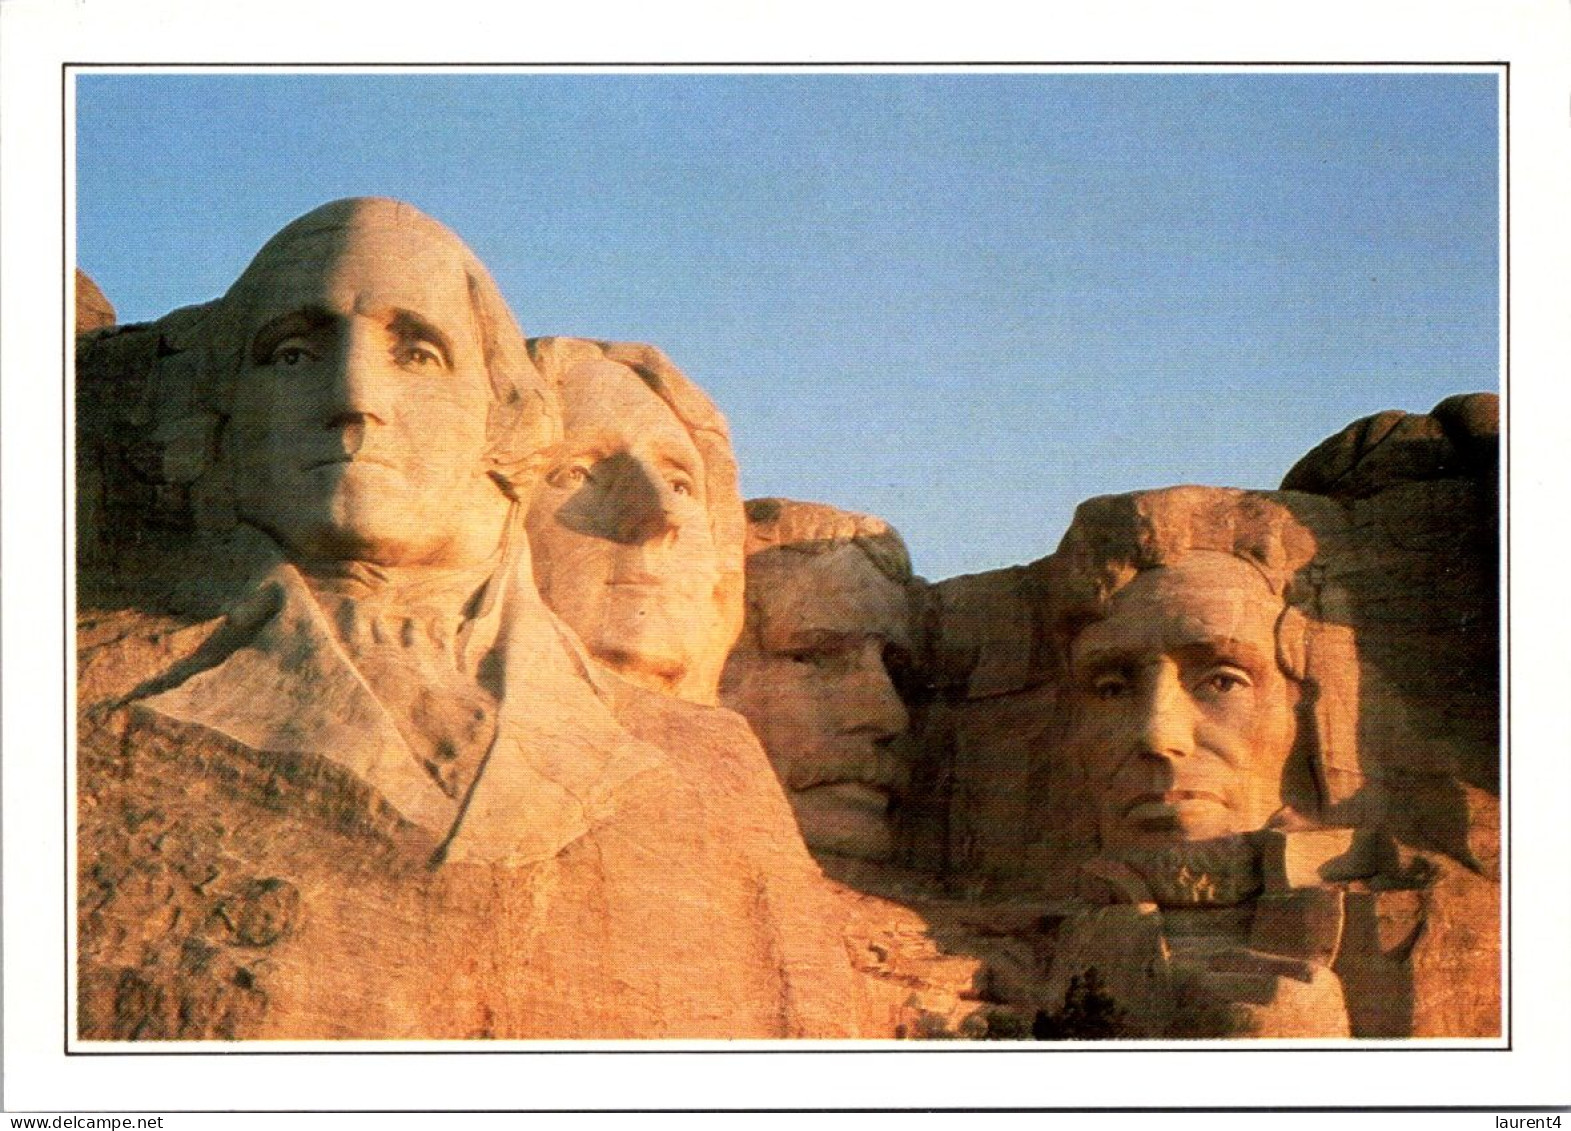 24-8-2023 (3 T 10) USA - Mont Rushmore  (US Presidents Head Carving) - Mount Rushmore